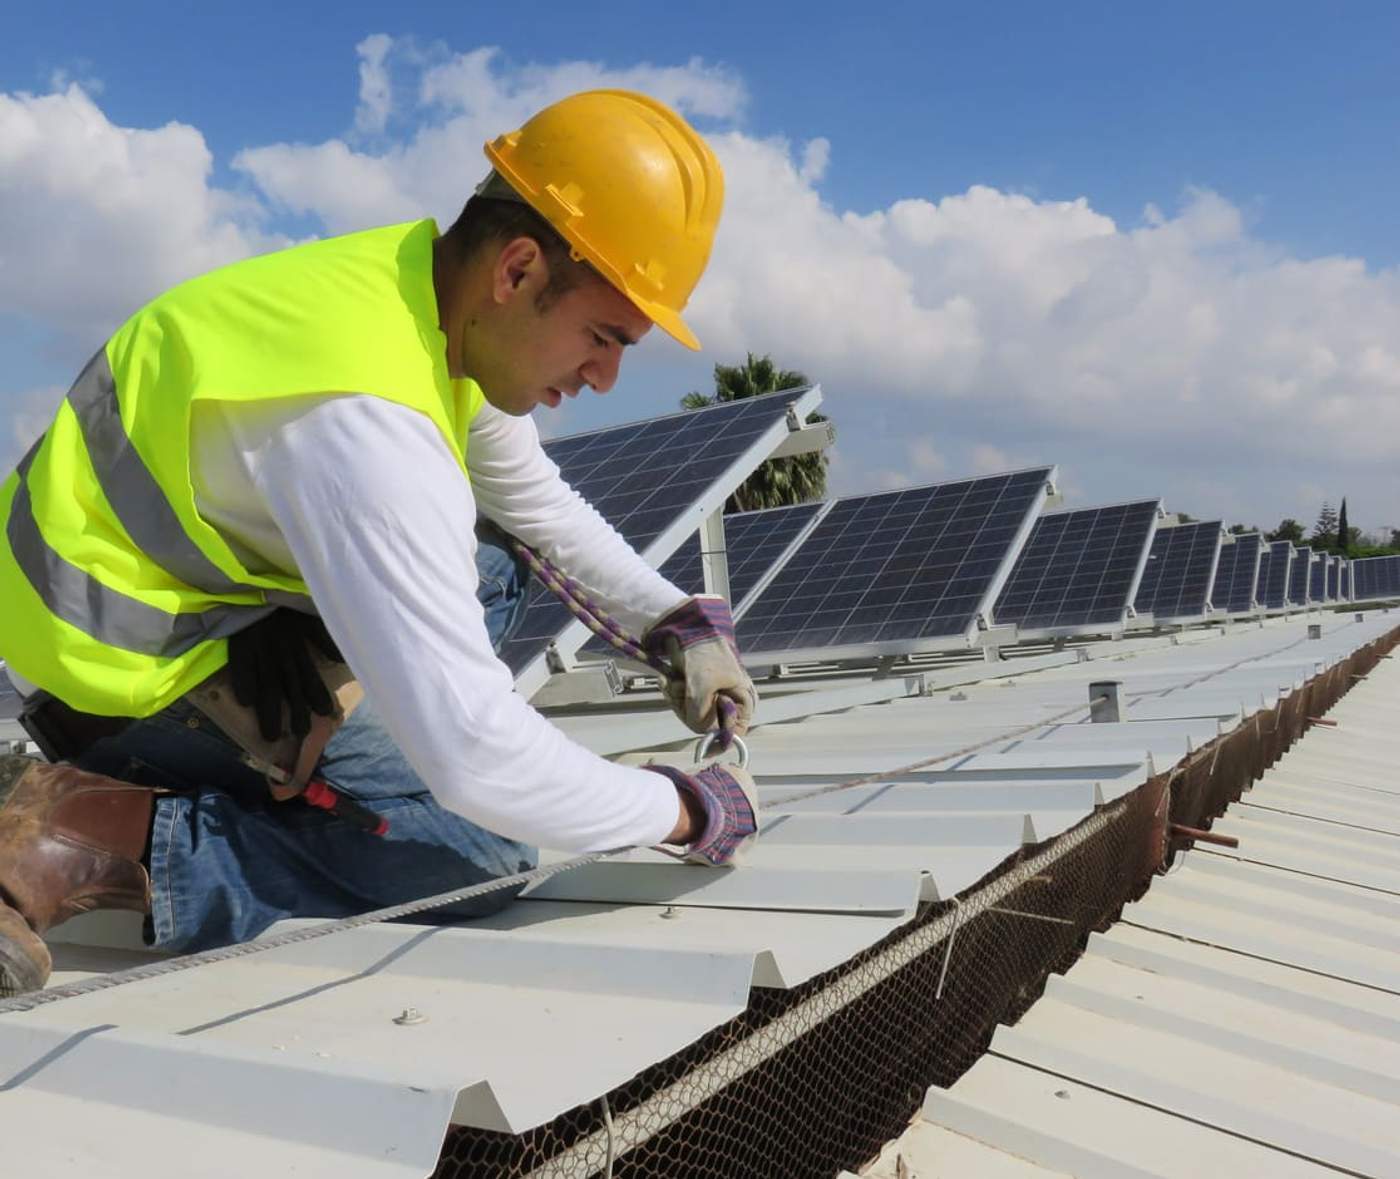 Installing solar panels on sustainable constructions